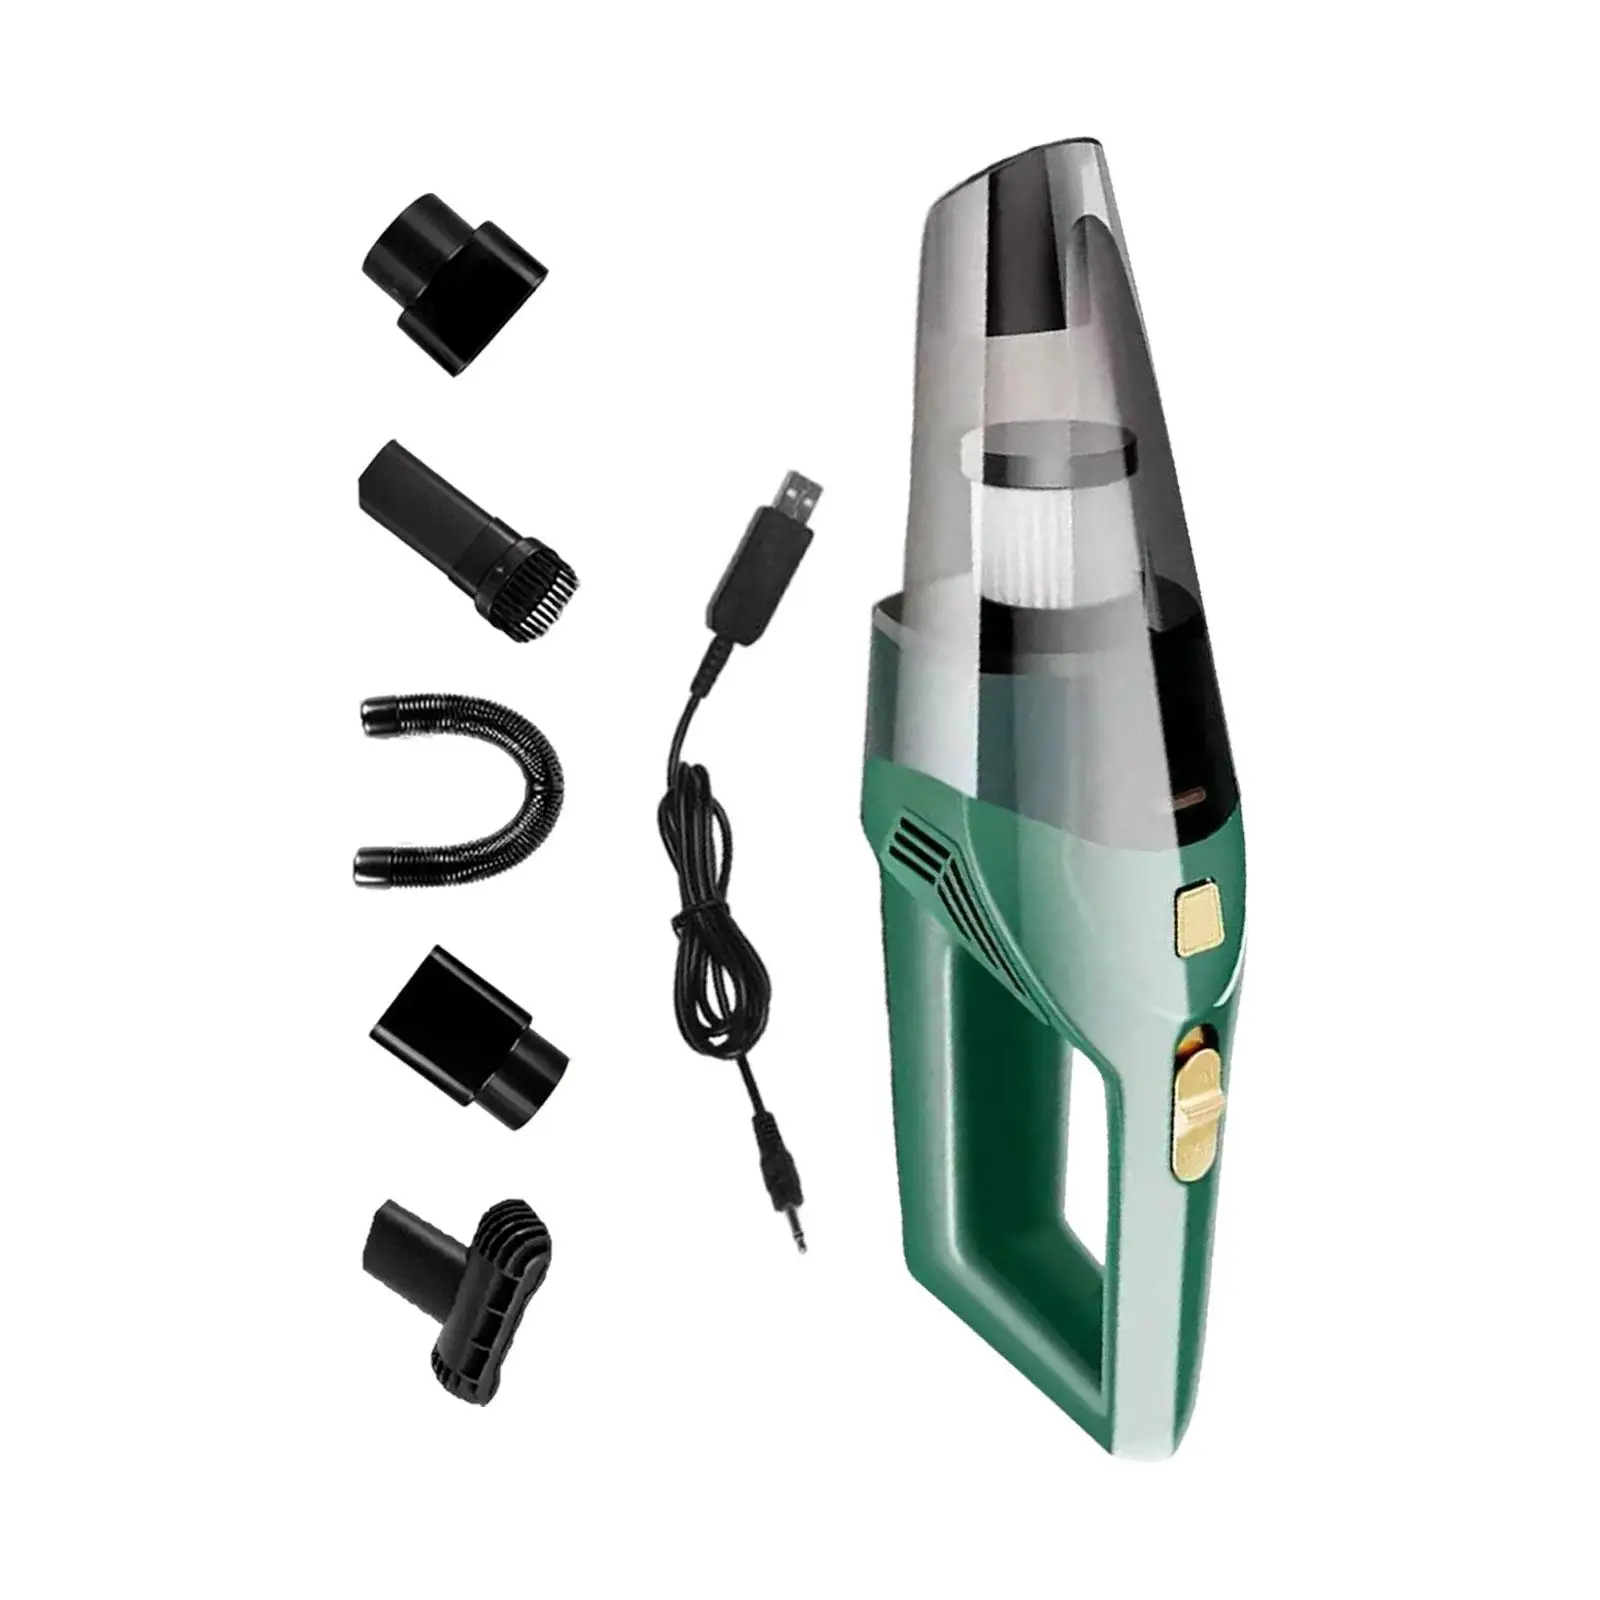 Portable Car Vacuum Cleaner 12V 120W Powerful High Power Wet and Dry Using for